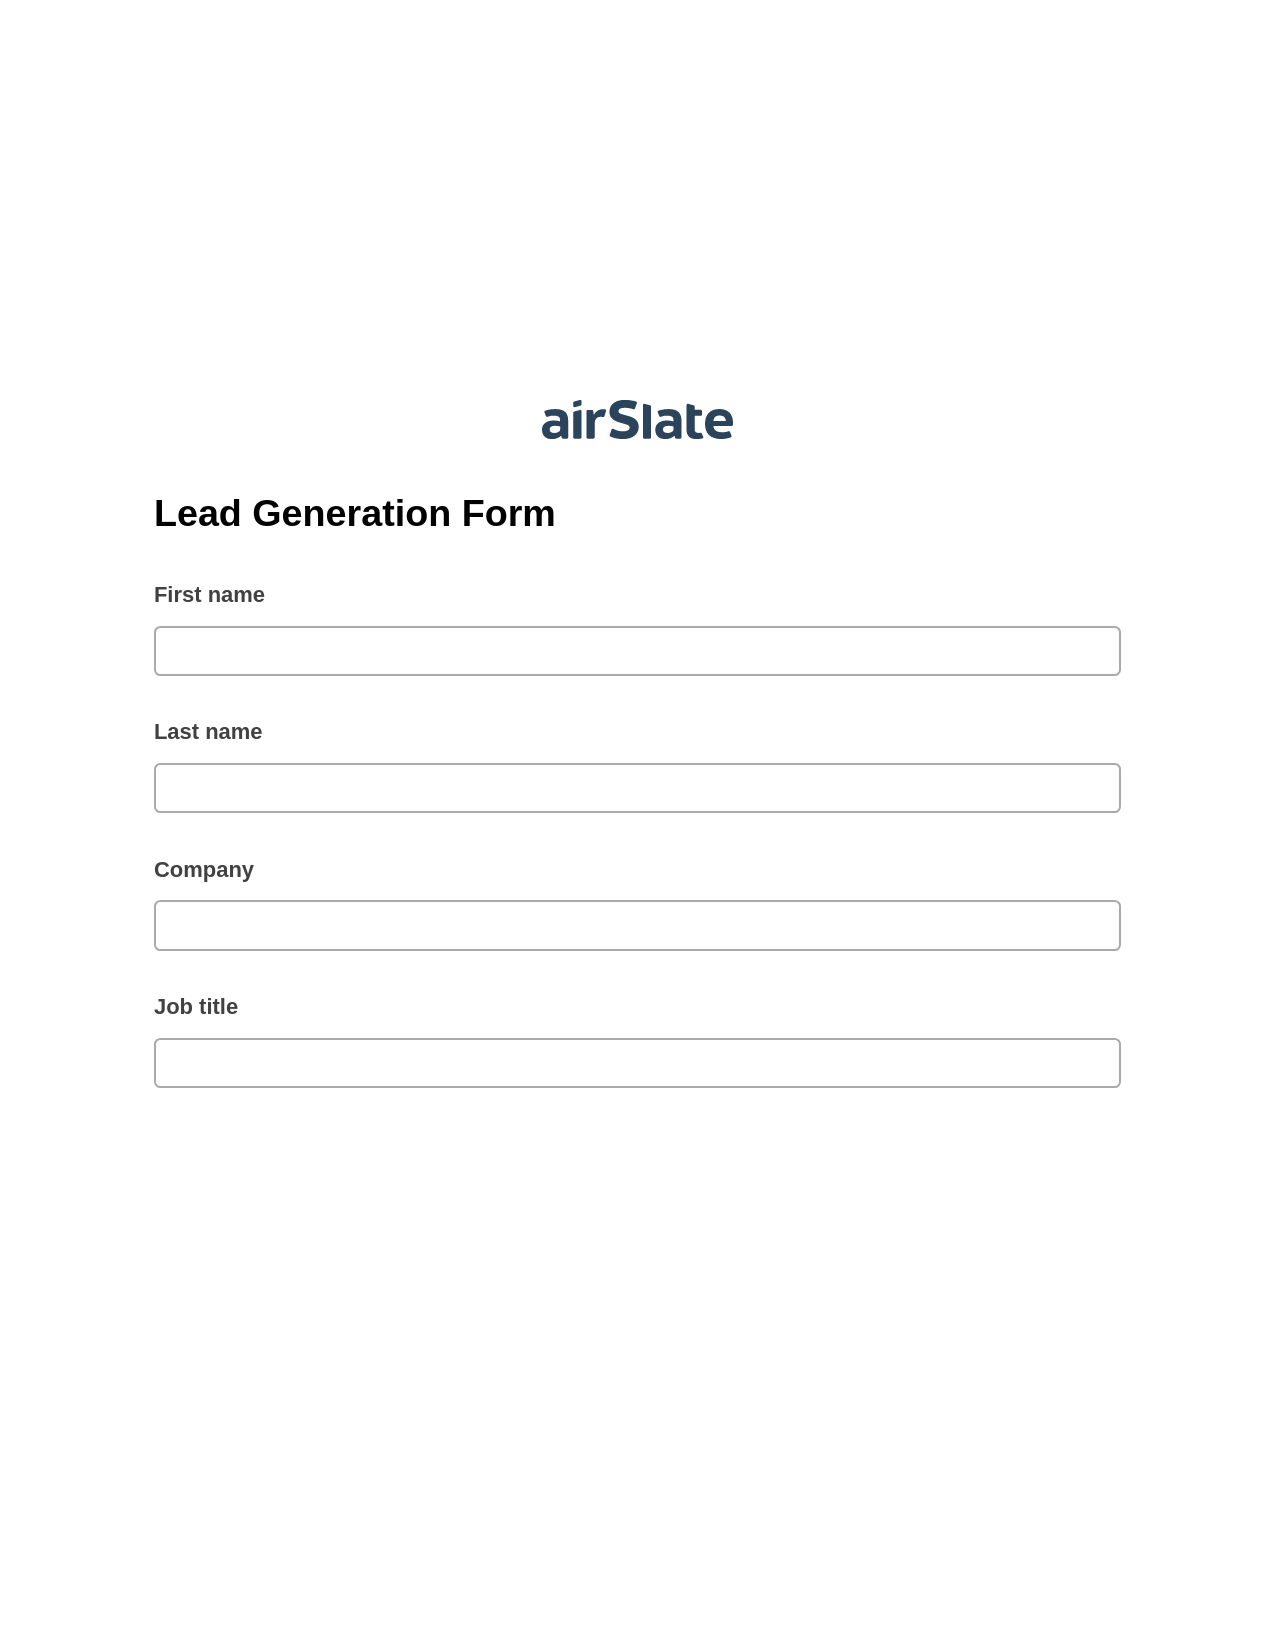 Lead Generation Form Pre-fill from CSV File Bot, Send a Slate with Roles Bot, Export to WebMerge Bot